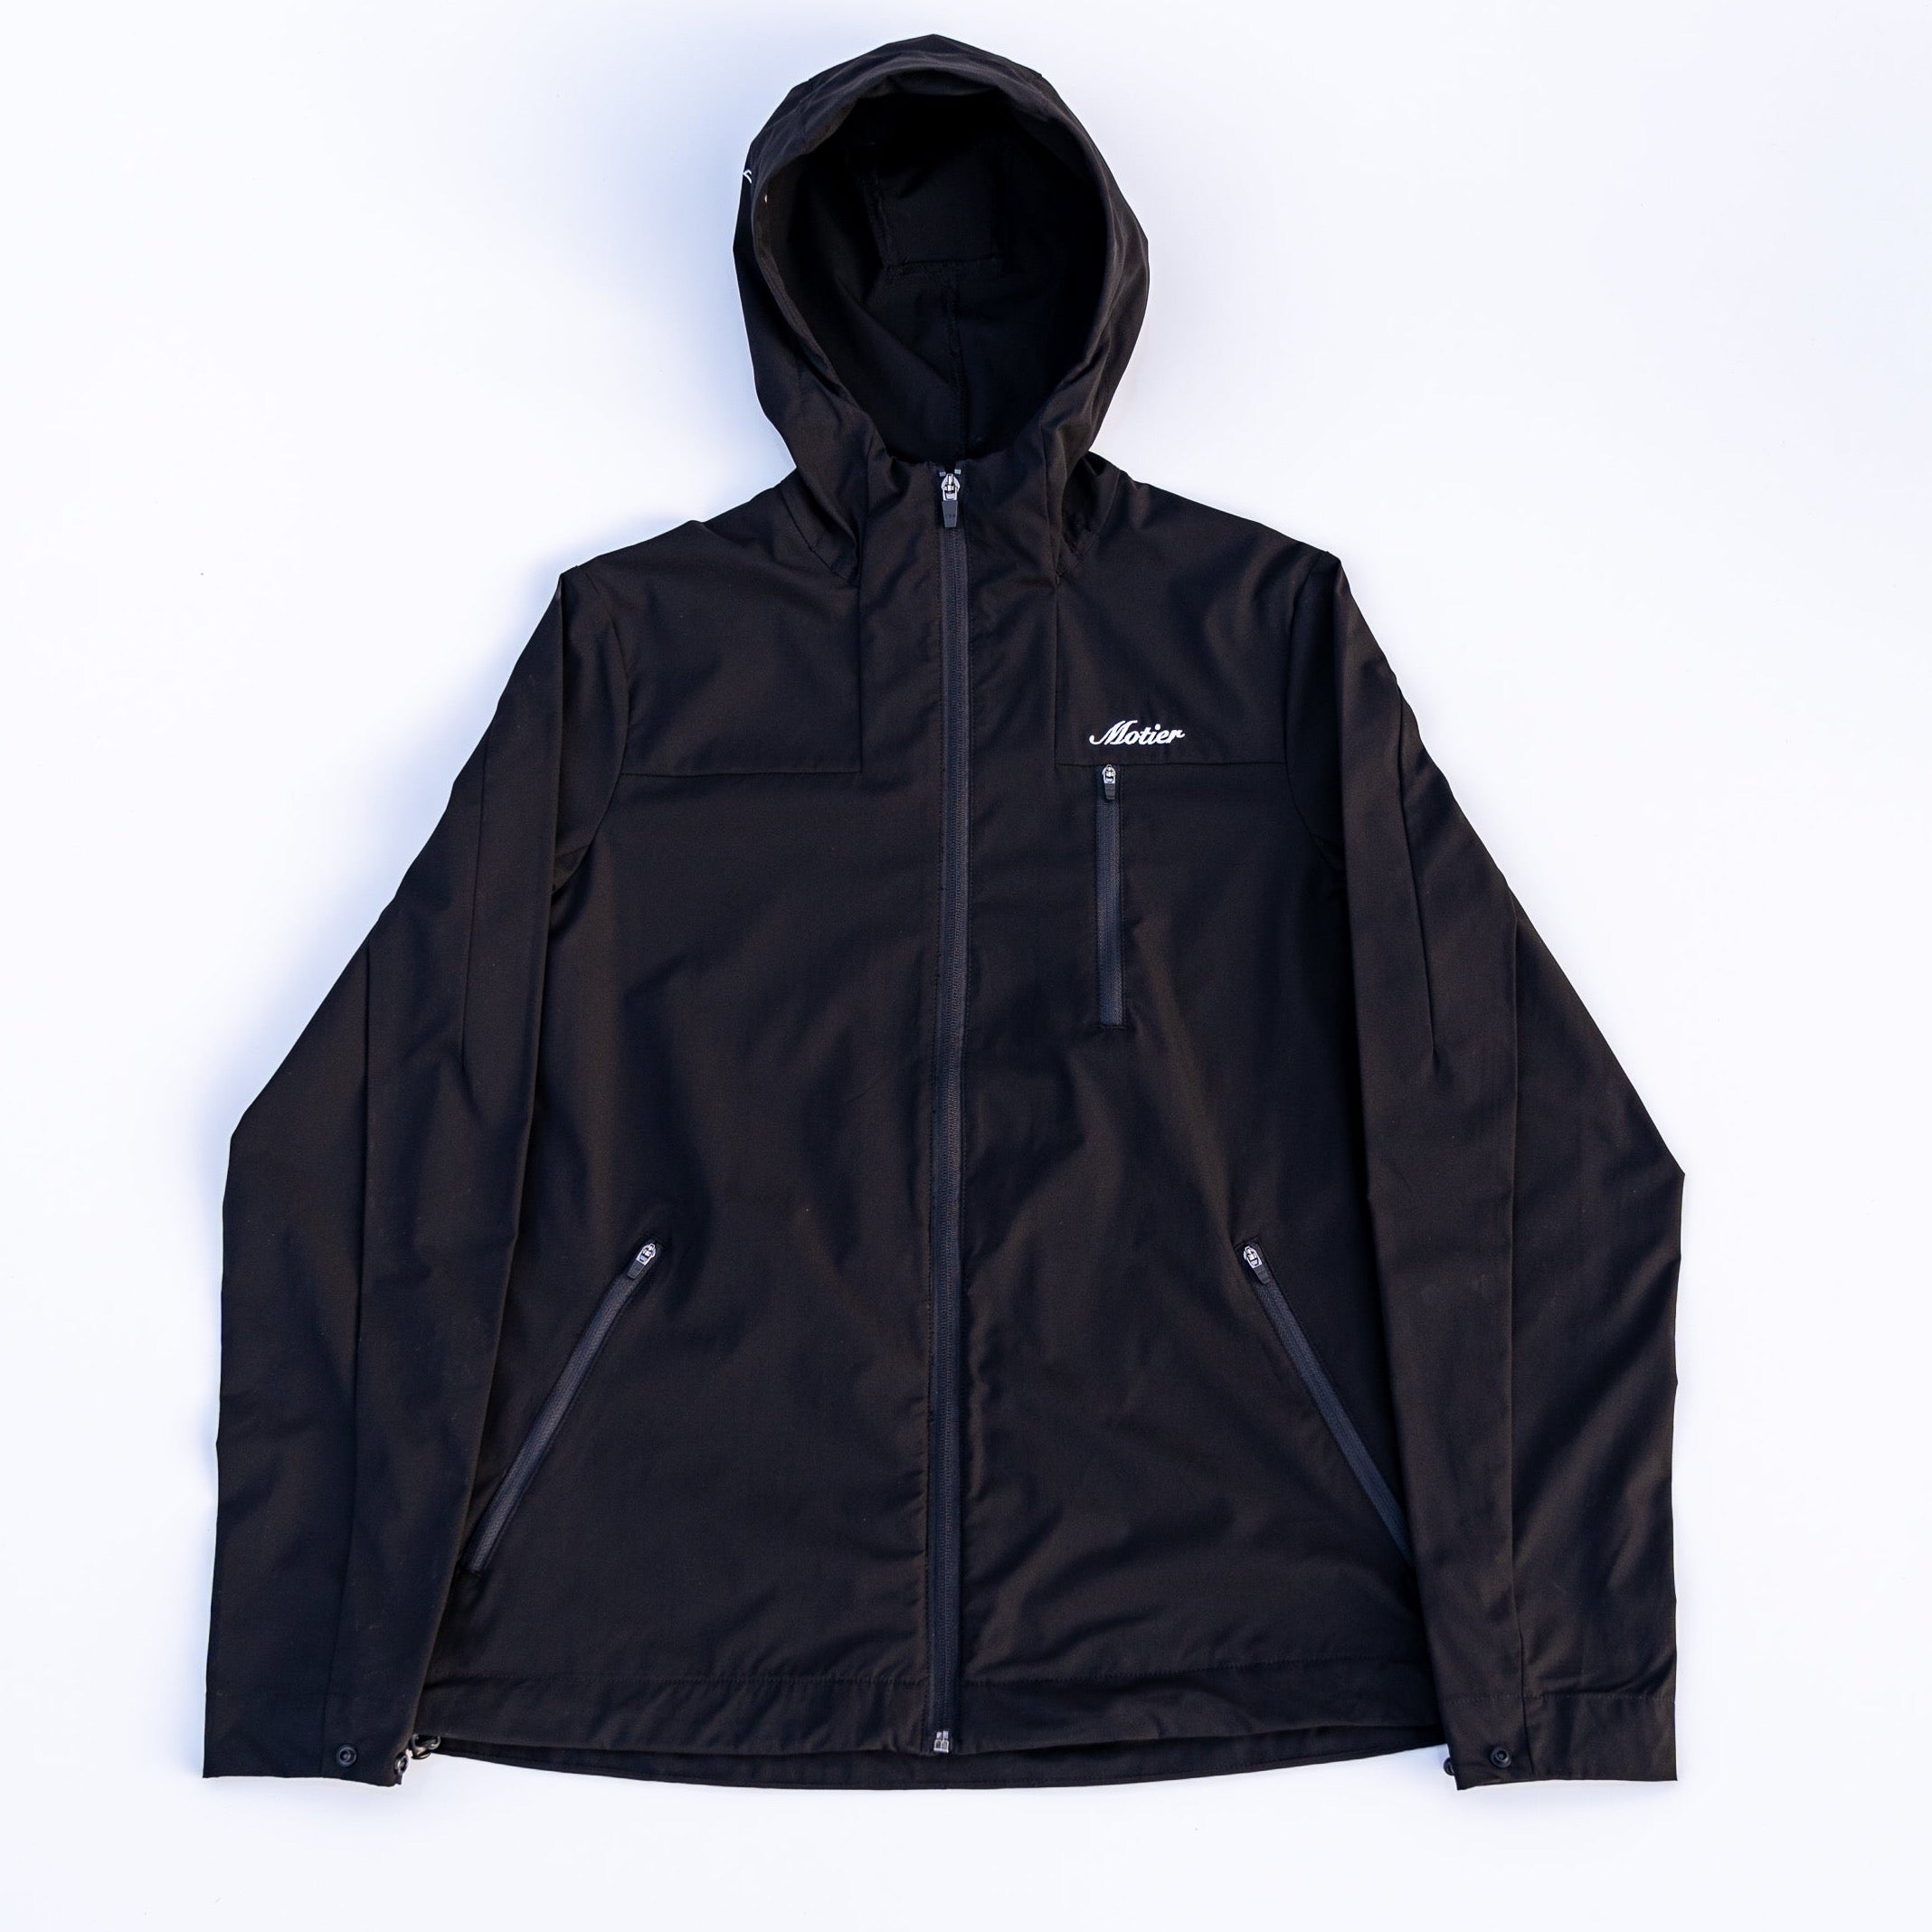 L04070 - Victory - Men's Athletic Twill Track Jacket